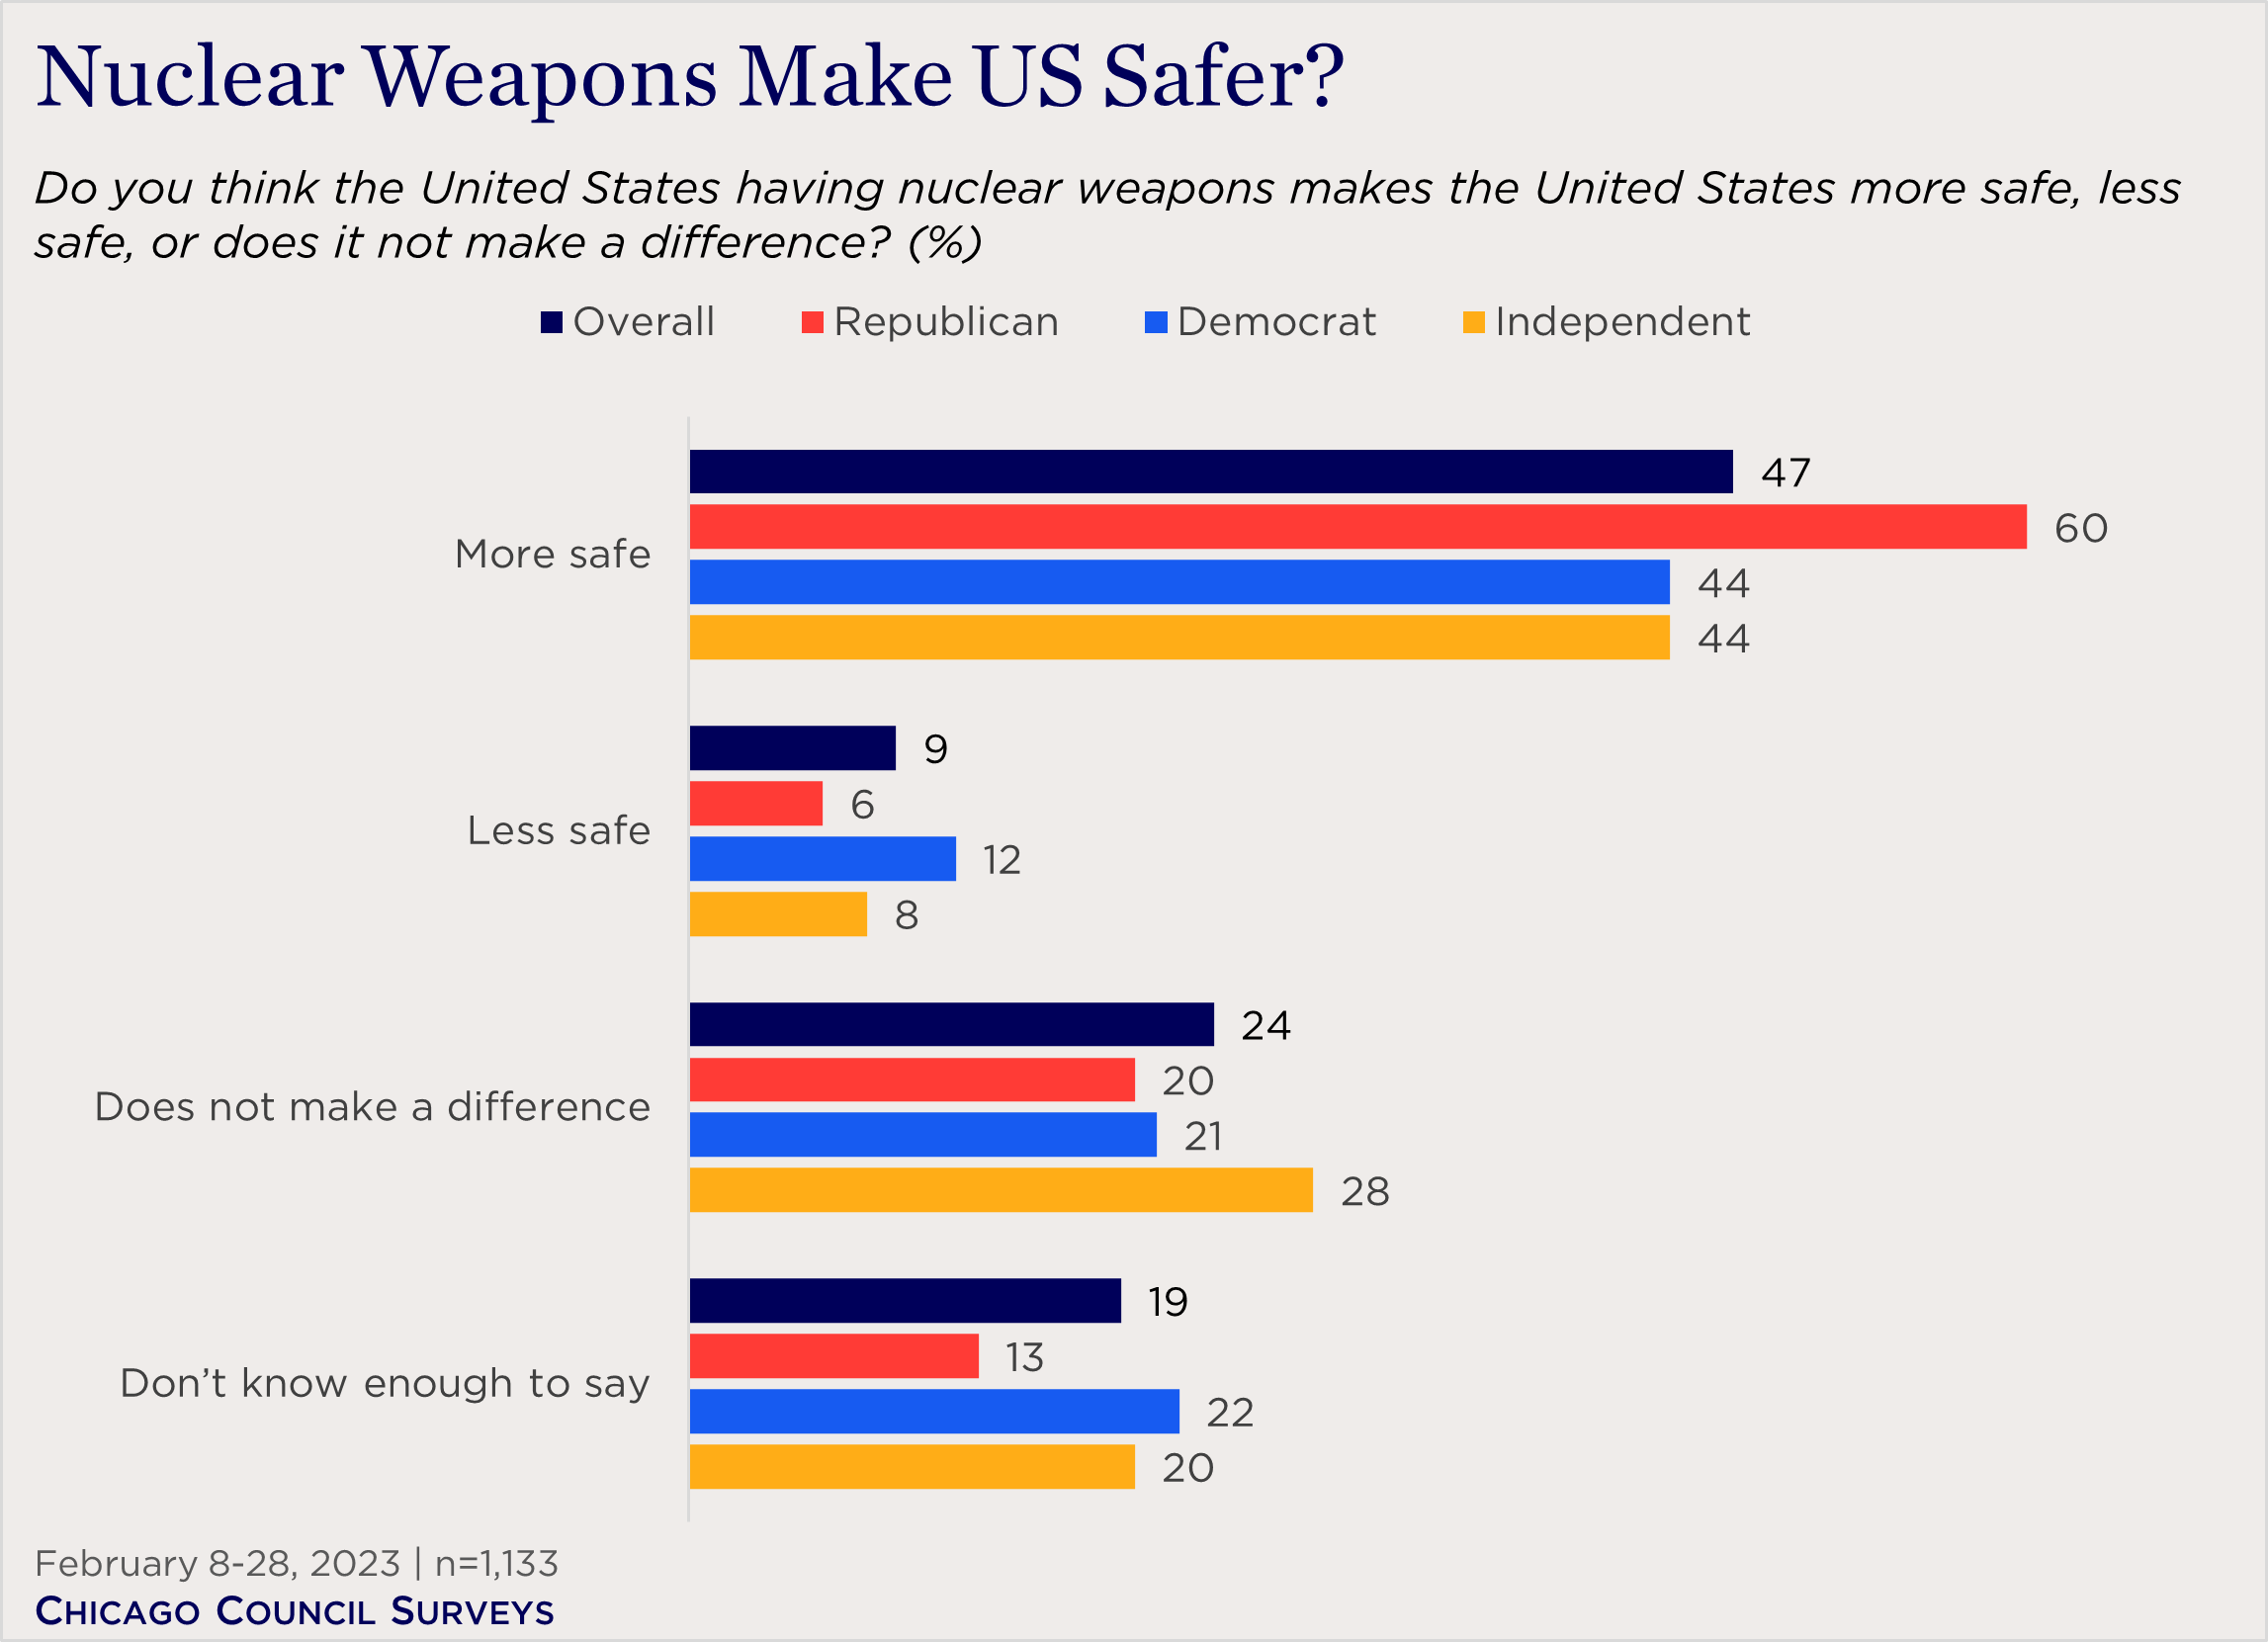 "bar chart showing views on whether nuclear weapons make US safer"